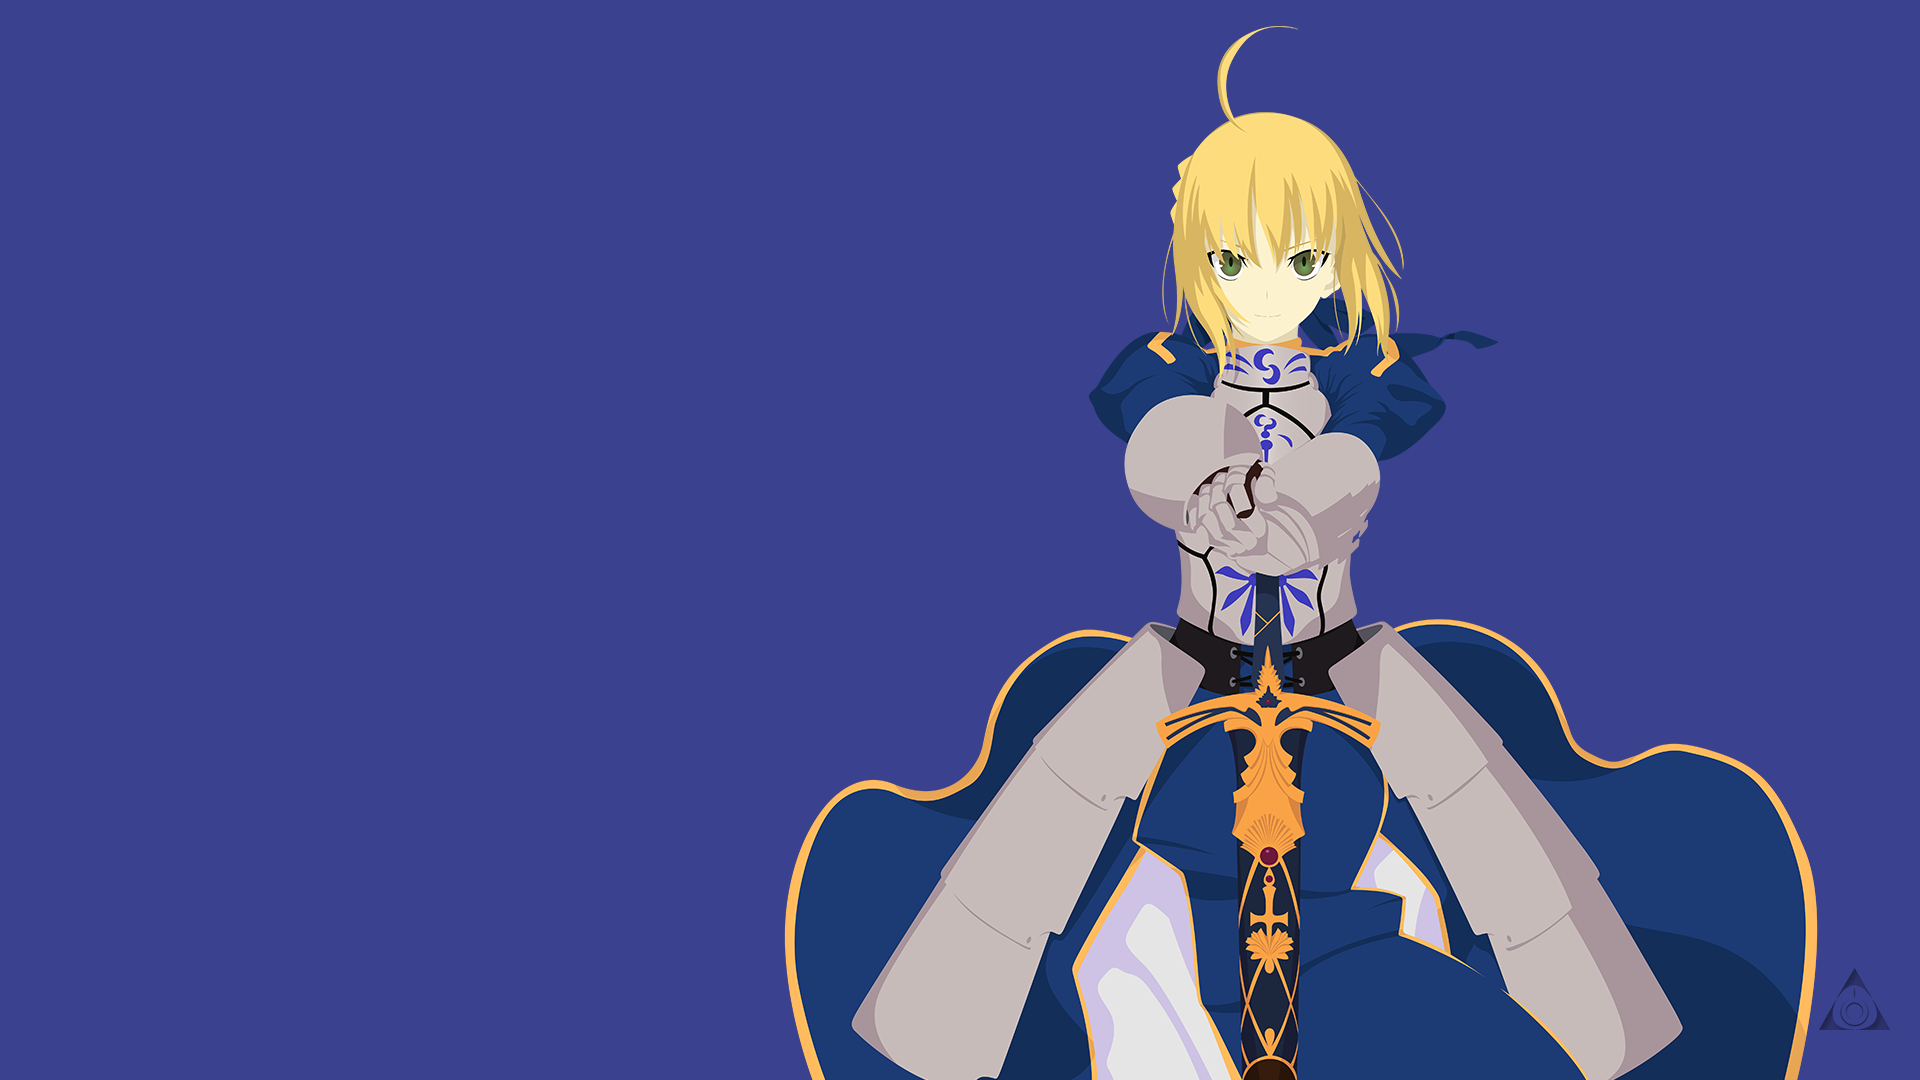 Online crop | two anime characters digital wallpaper, Fate/Stay Night ...